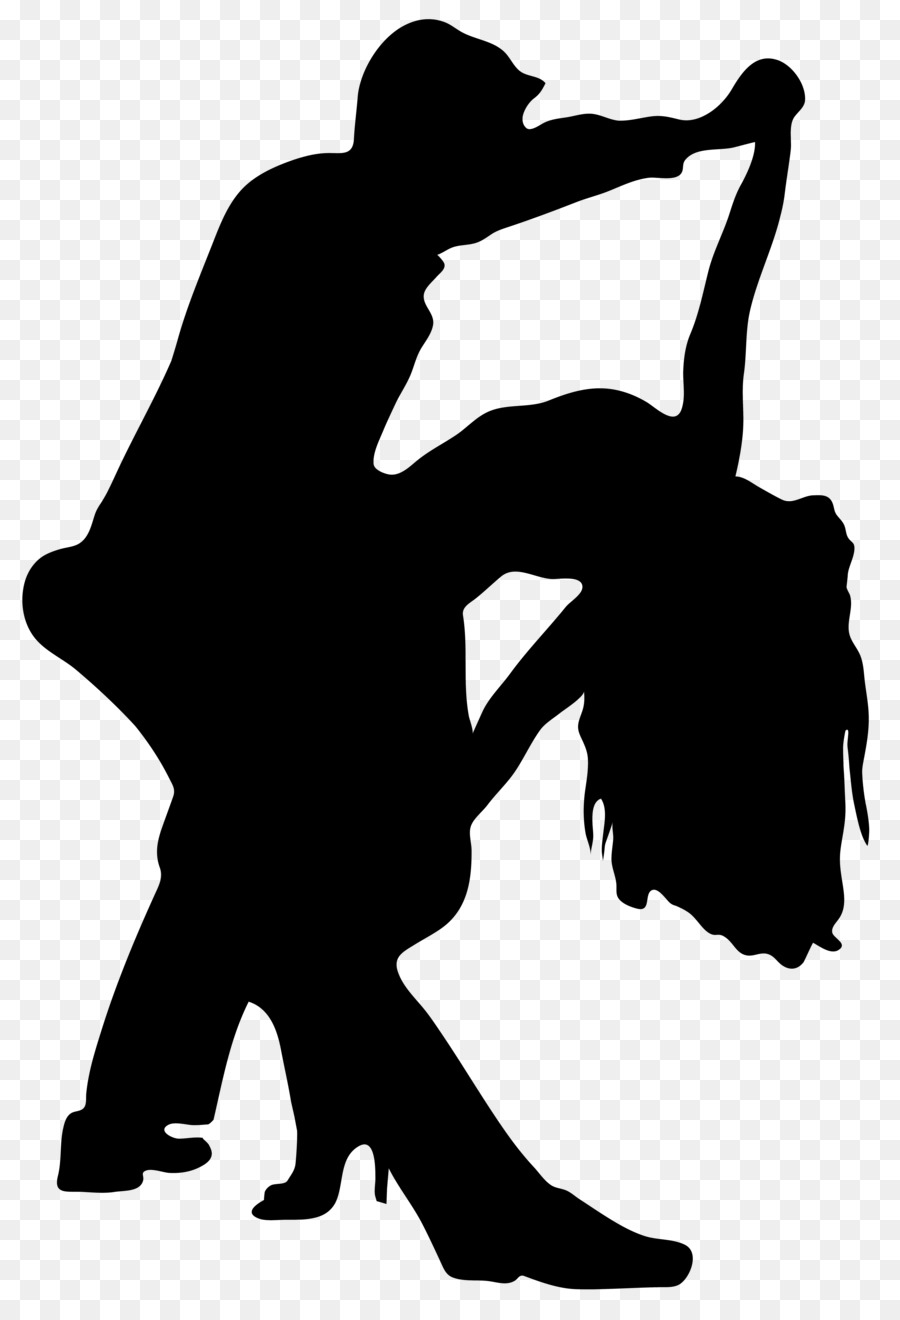 Dance Silhouette Clip art - Silhouette png download - 5490*8000 - Free Transparent Dance png Download.